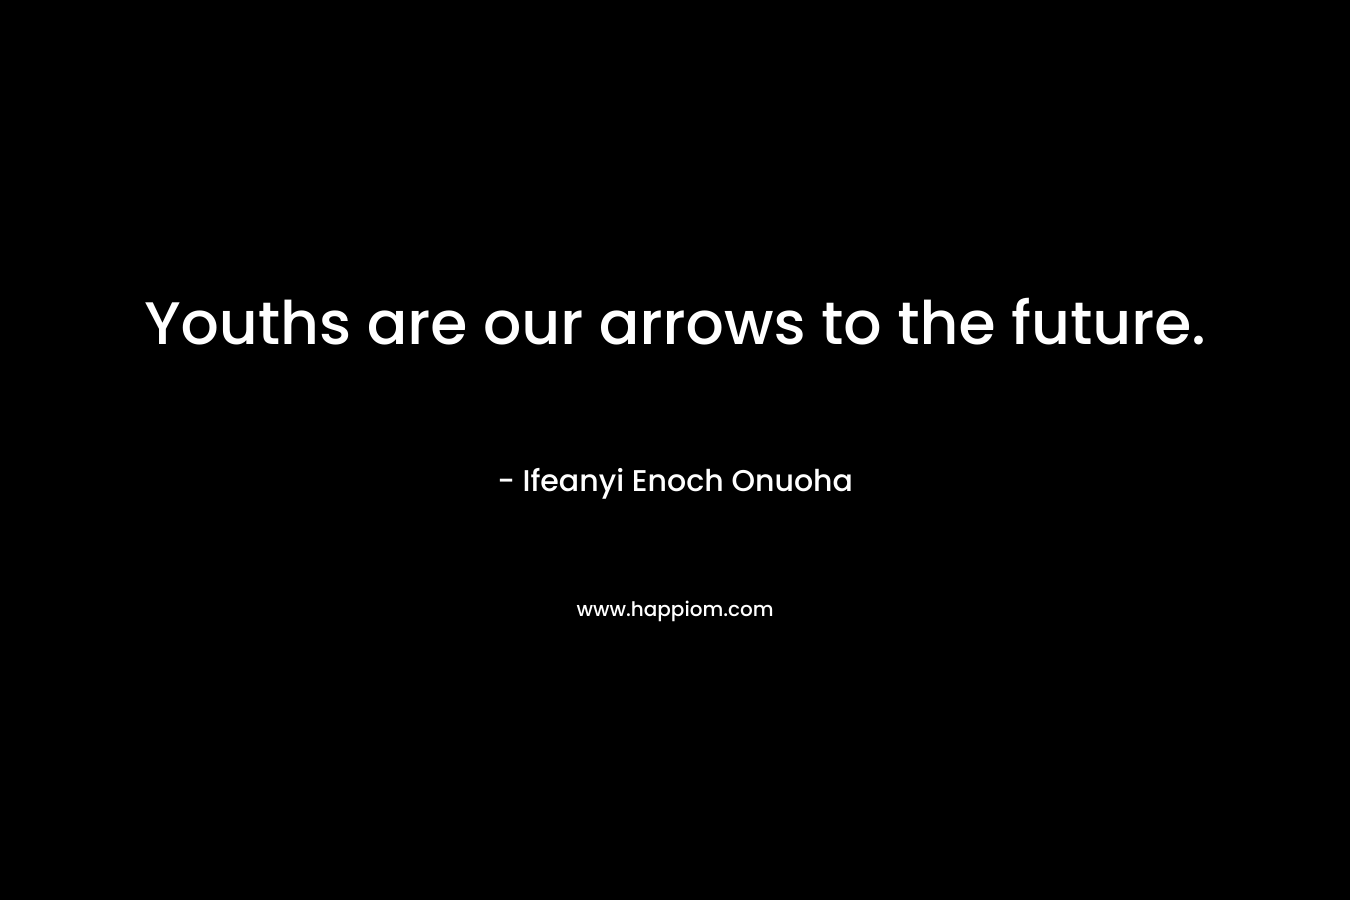 Youths are our arrows to the future.